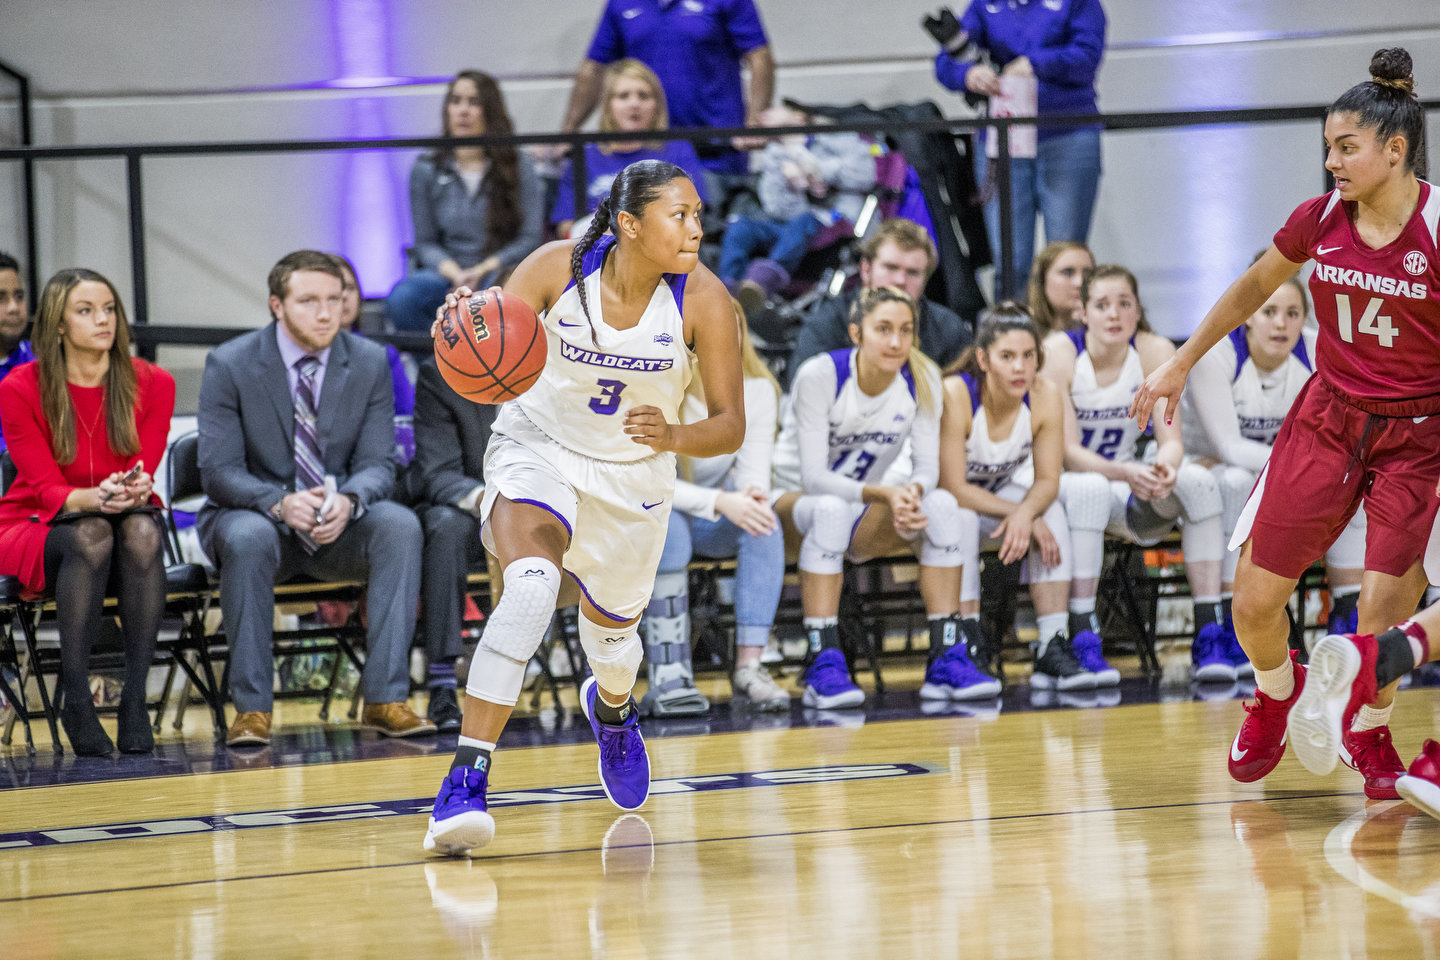 Dominique Golightly (Kiowa) Leads Abilene Christian with 20 points in 72-62 win at  Houston Baptist in Southland Conference Play